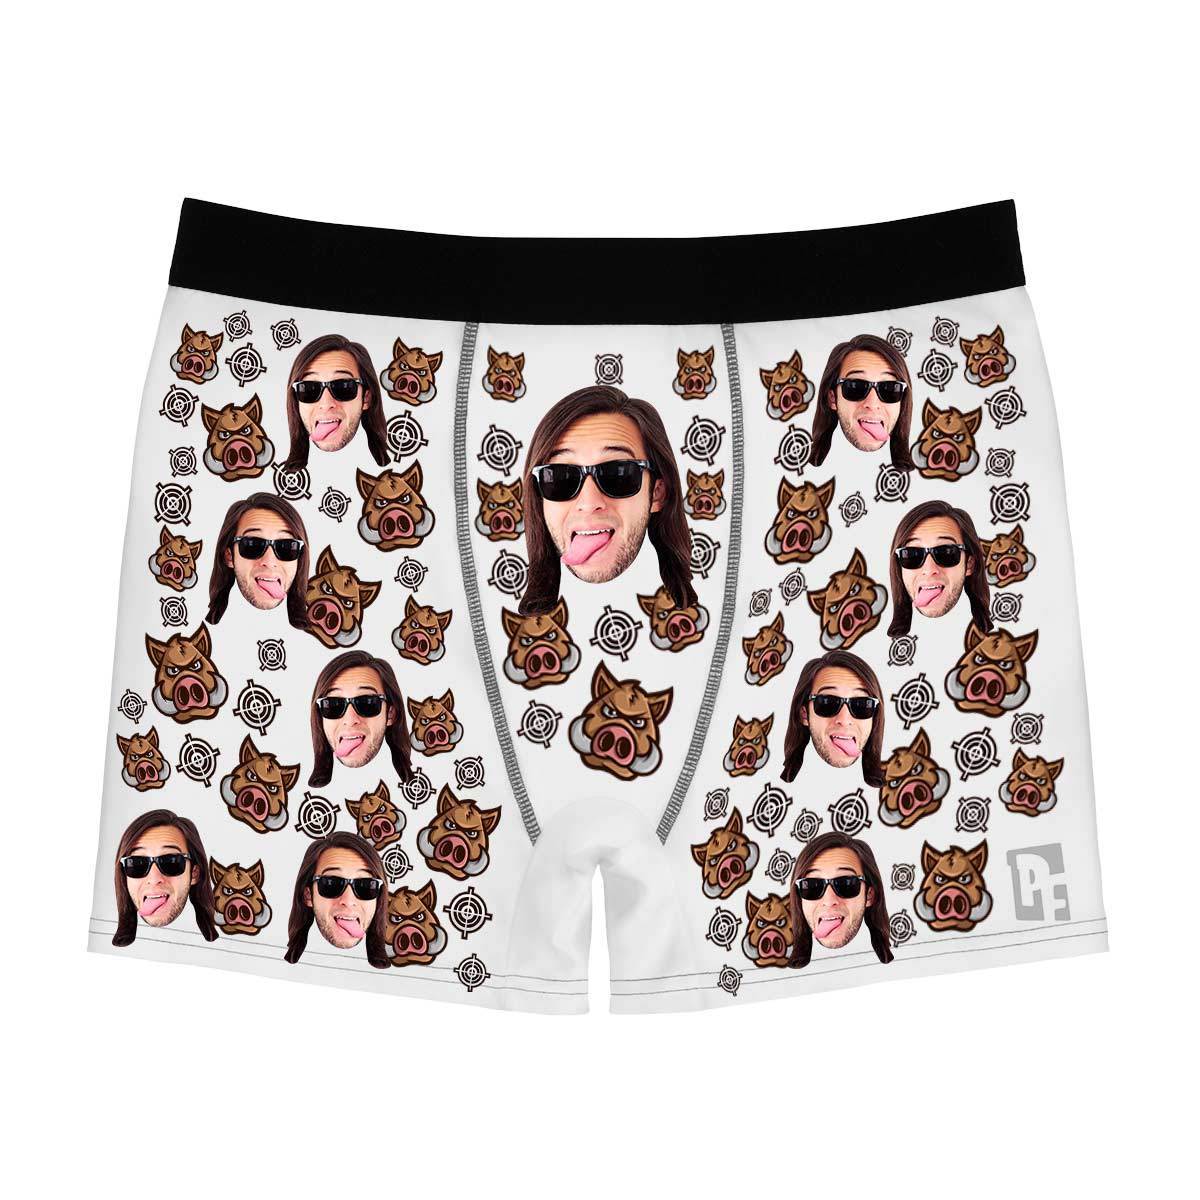 White Boar Hunter men's boxer briefs personalized with photo printed on them